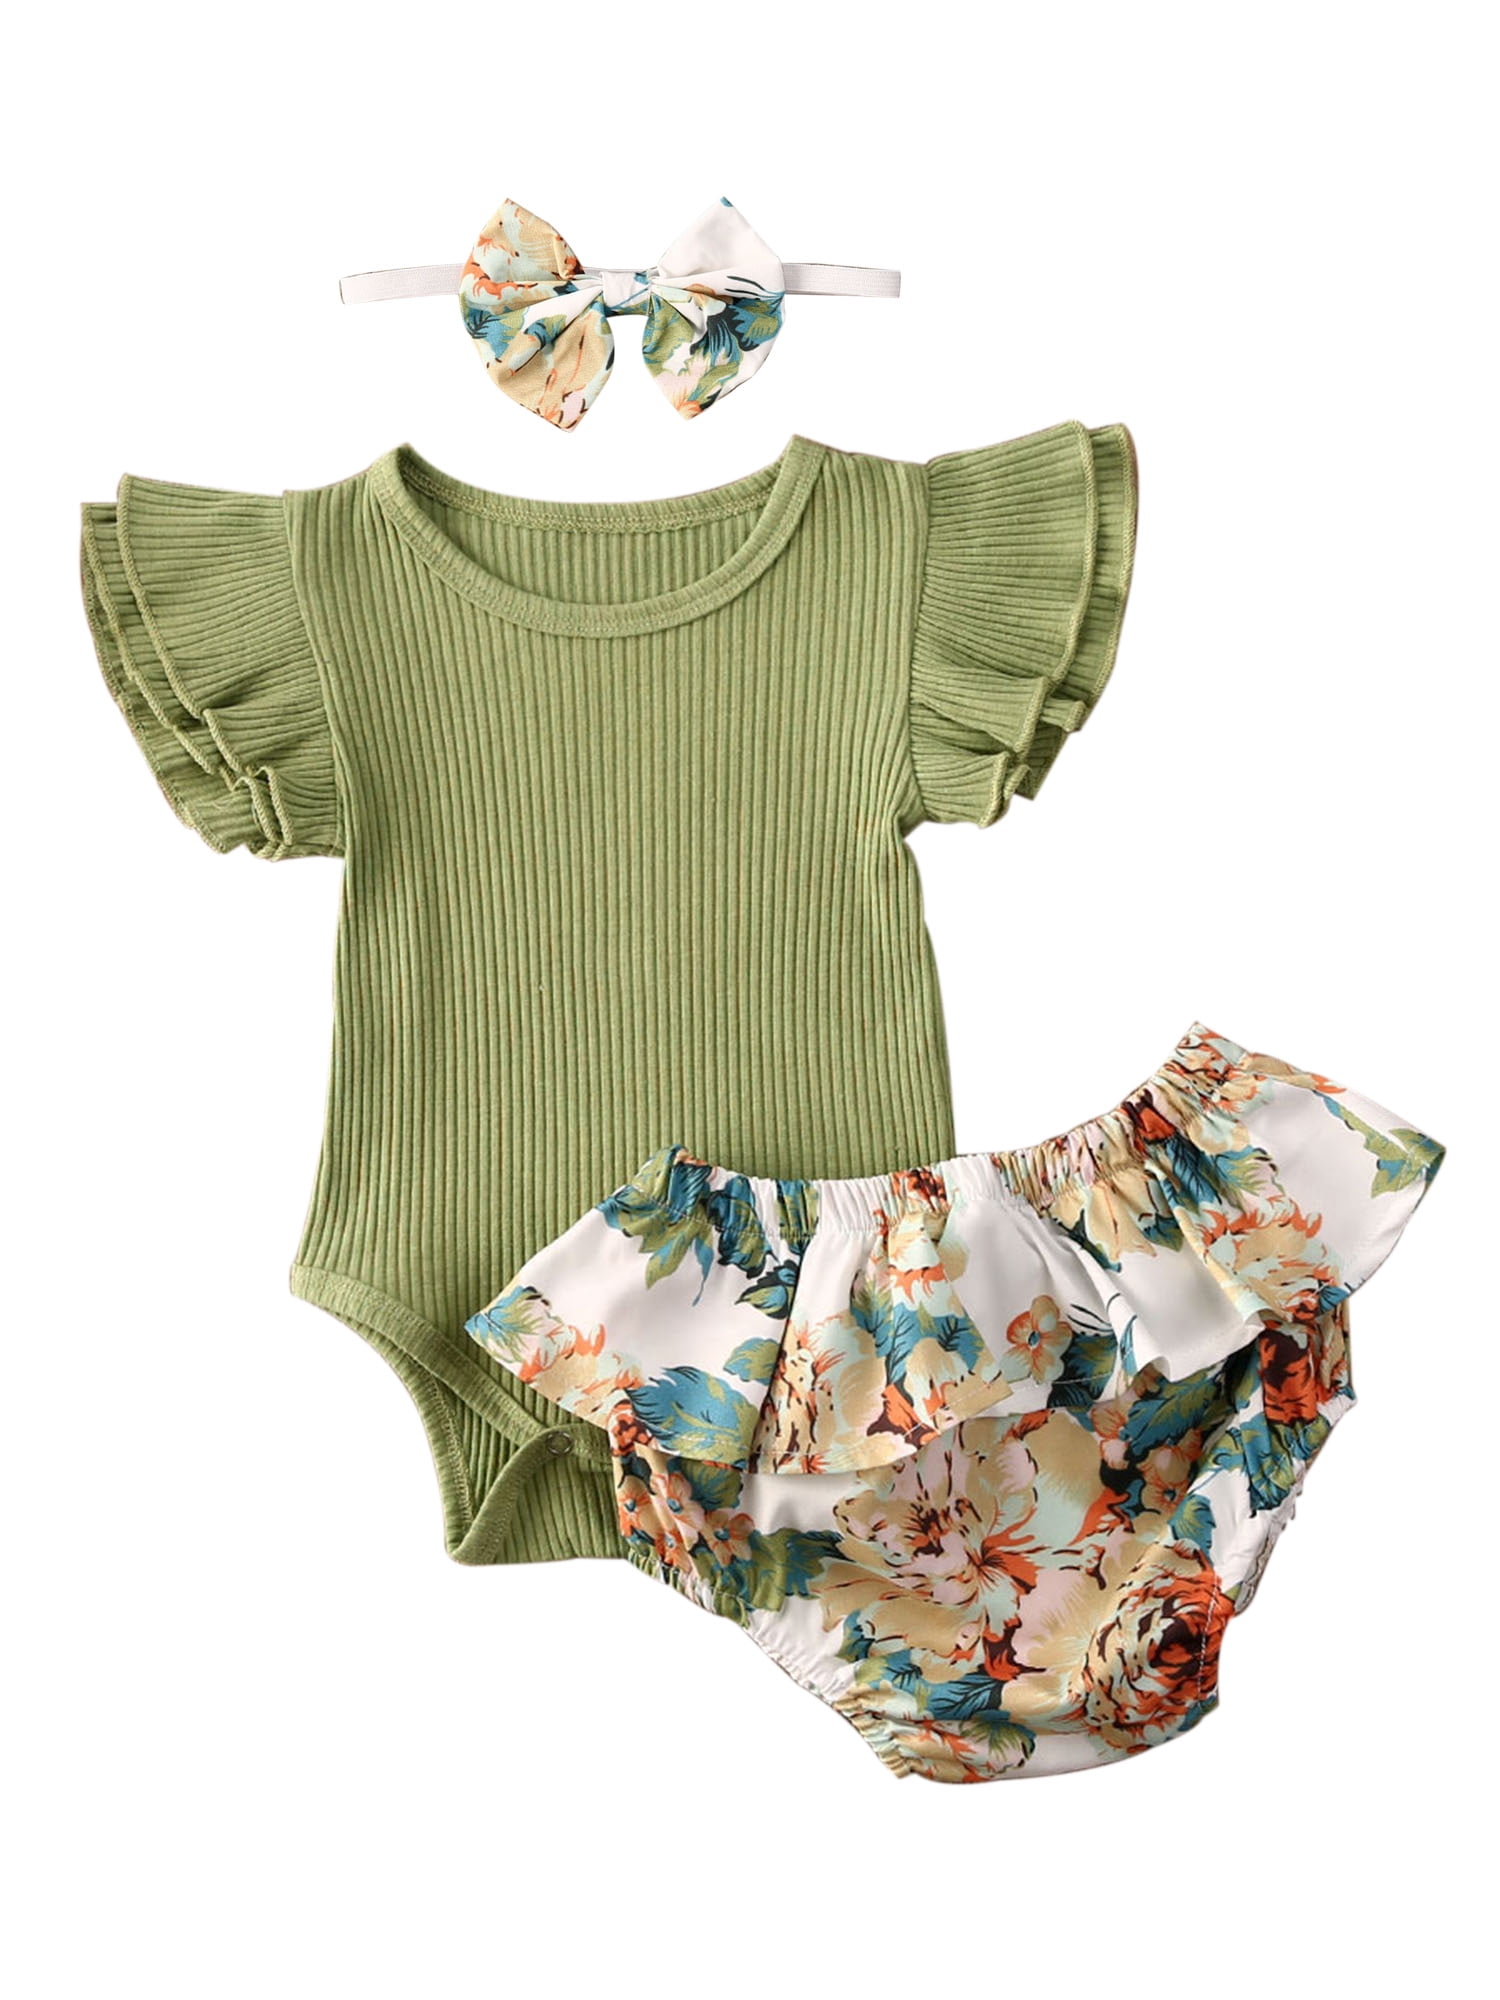 size 0-3m to 12-18m new baby girls outfit green top floral shorts & headband 